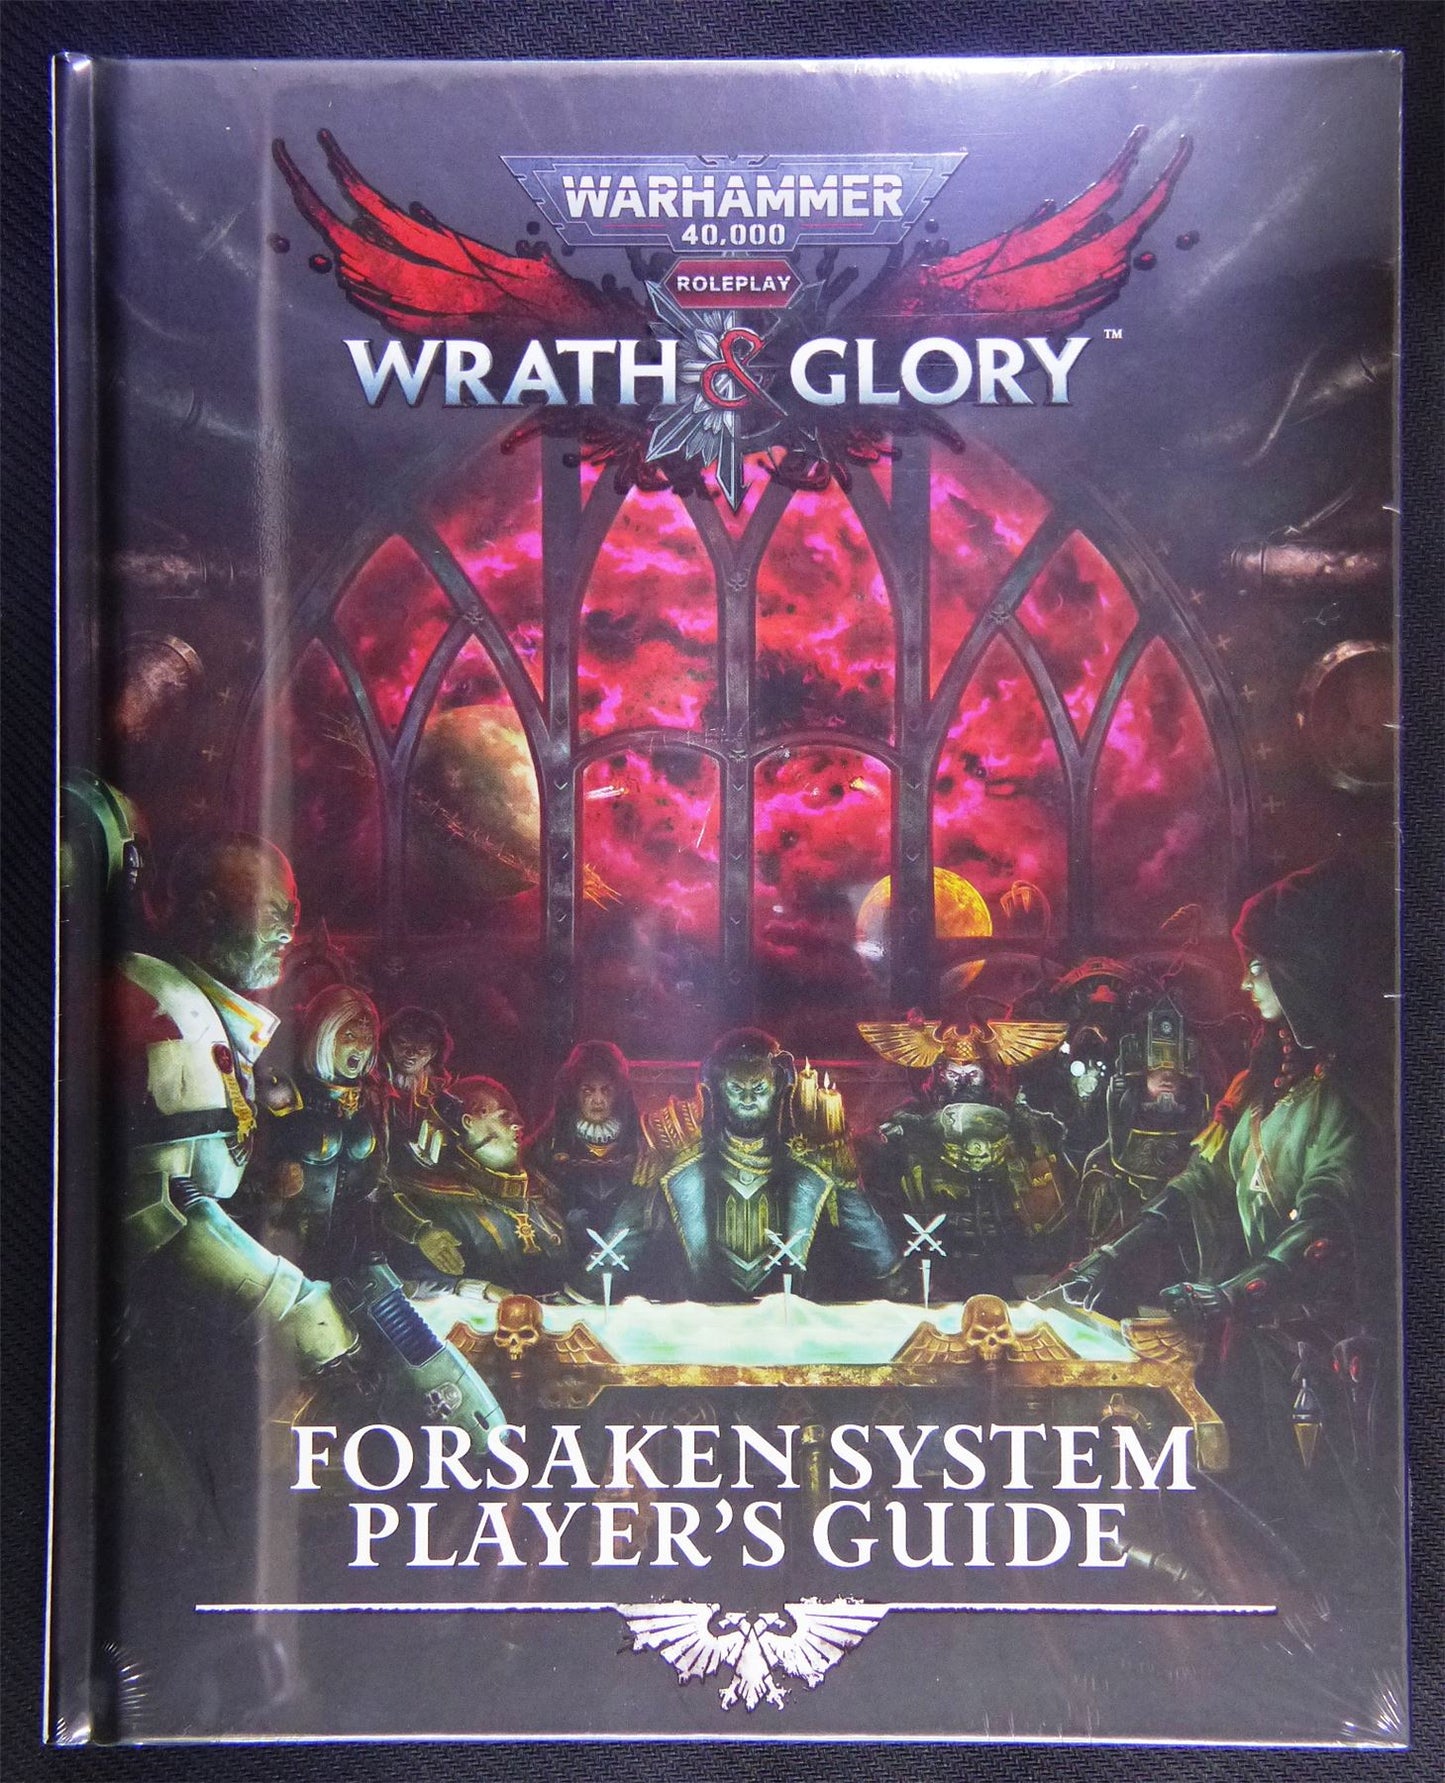 Warhammer 40K - Wrath And Glory - Forsaken System Players Guide - Roleplay - RPG #133